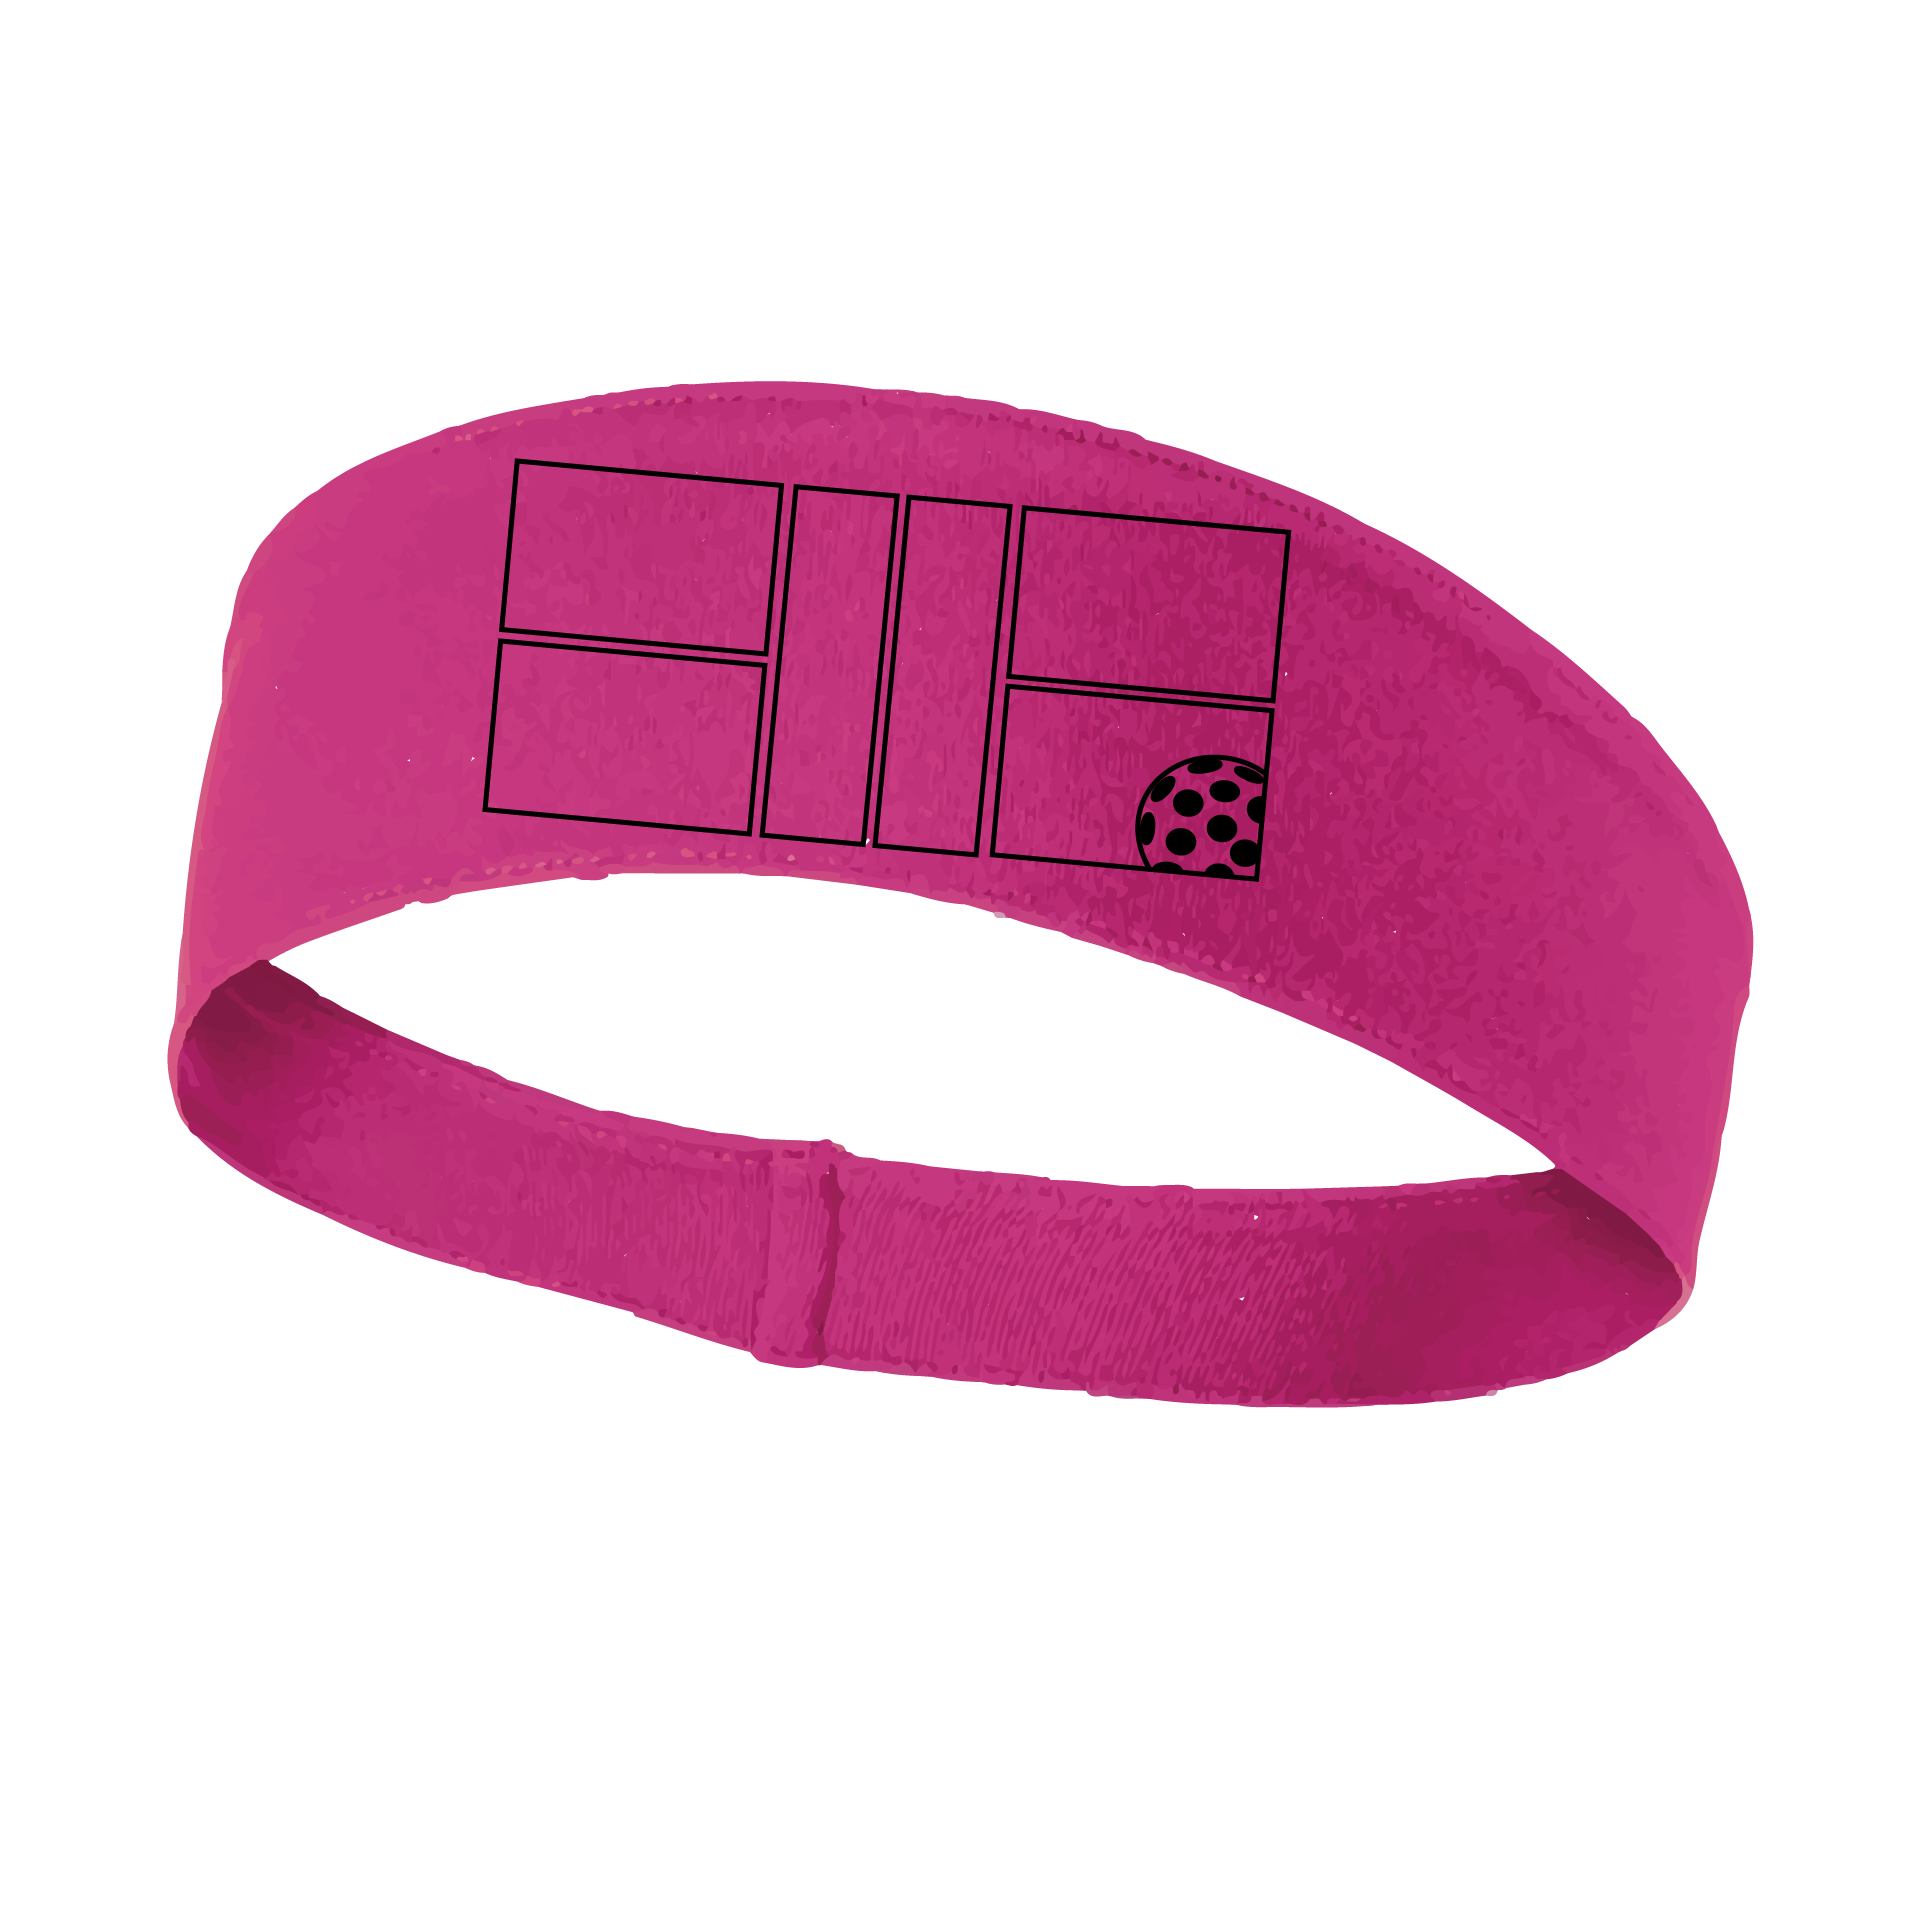 Pickleball Headband Design: Black Pickleball Court with Pickleball  This fun, pickleball designed, moisture-wicking headband narrows in the back to fit more securely. Single-needle top-stitched edging. These headbands come in a variety of colors. Truly shows your love for the sport of pickleball!!